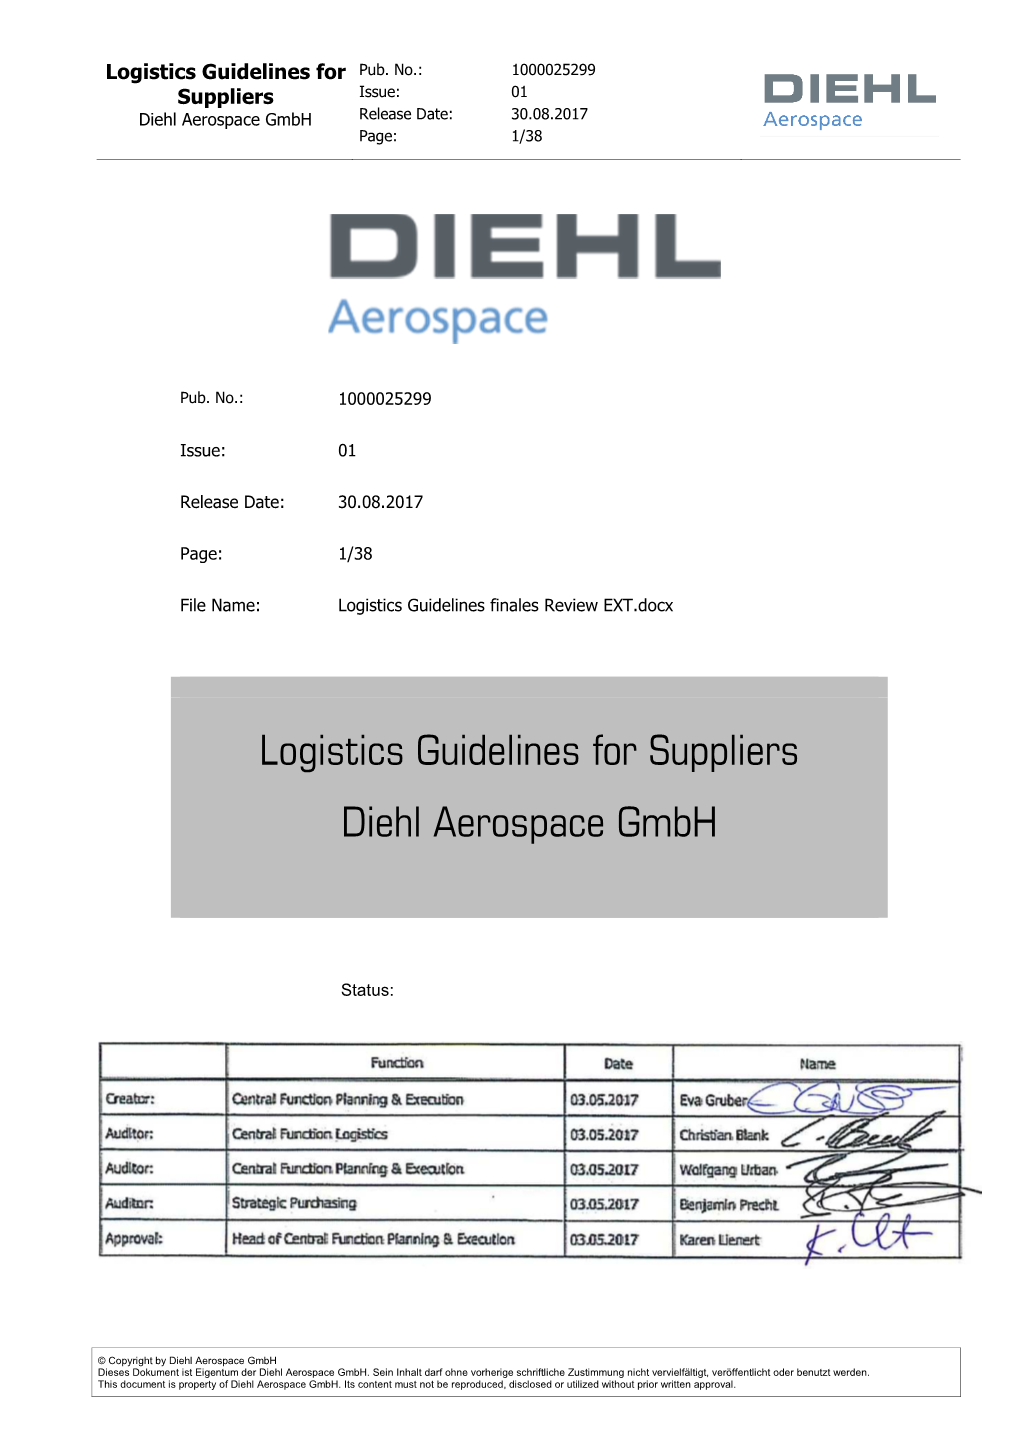 Logistics Guidelines for Suppliers Diehl Aerospace Gmbh